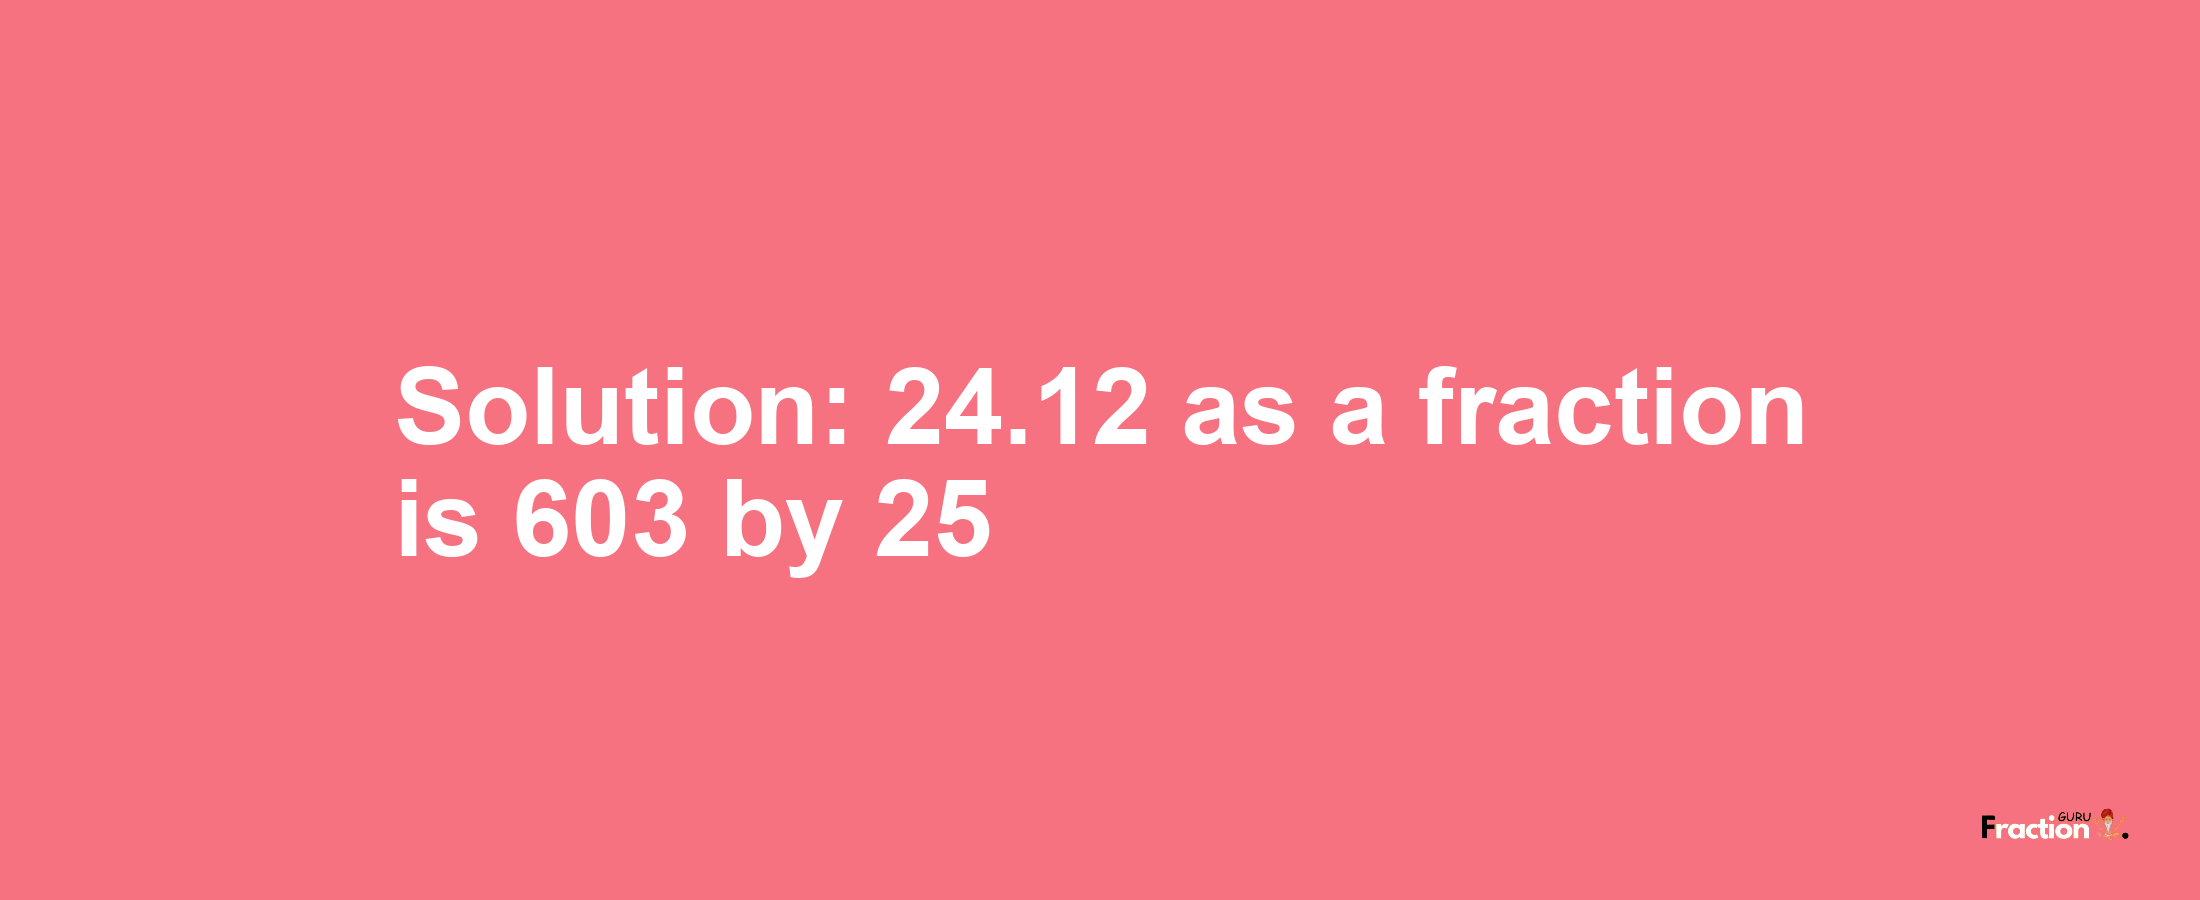 Solution:24.12 as a fraction is 603/25